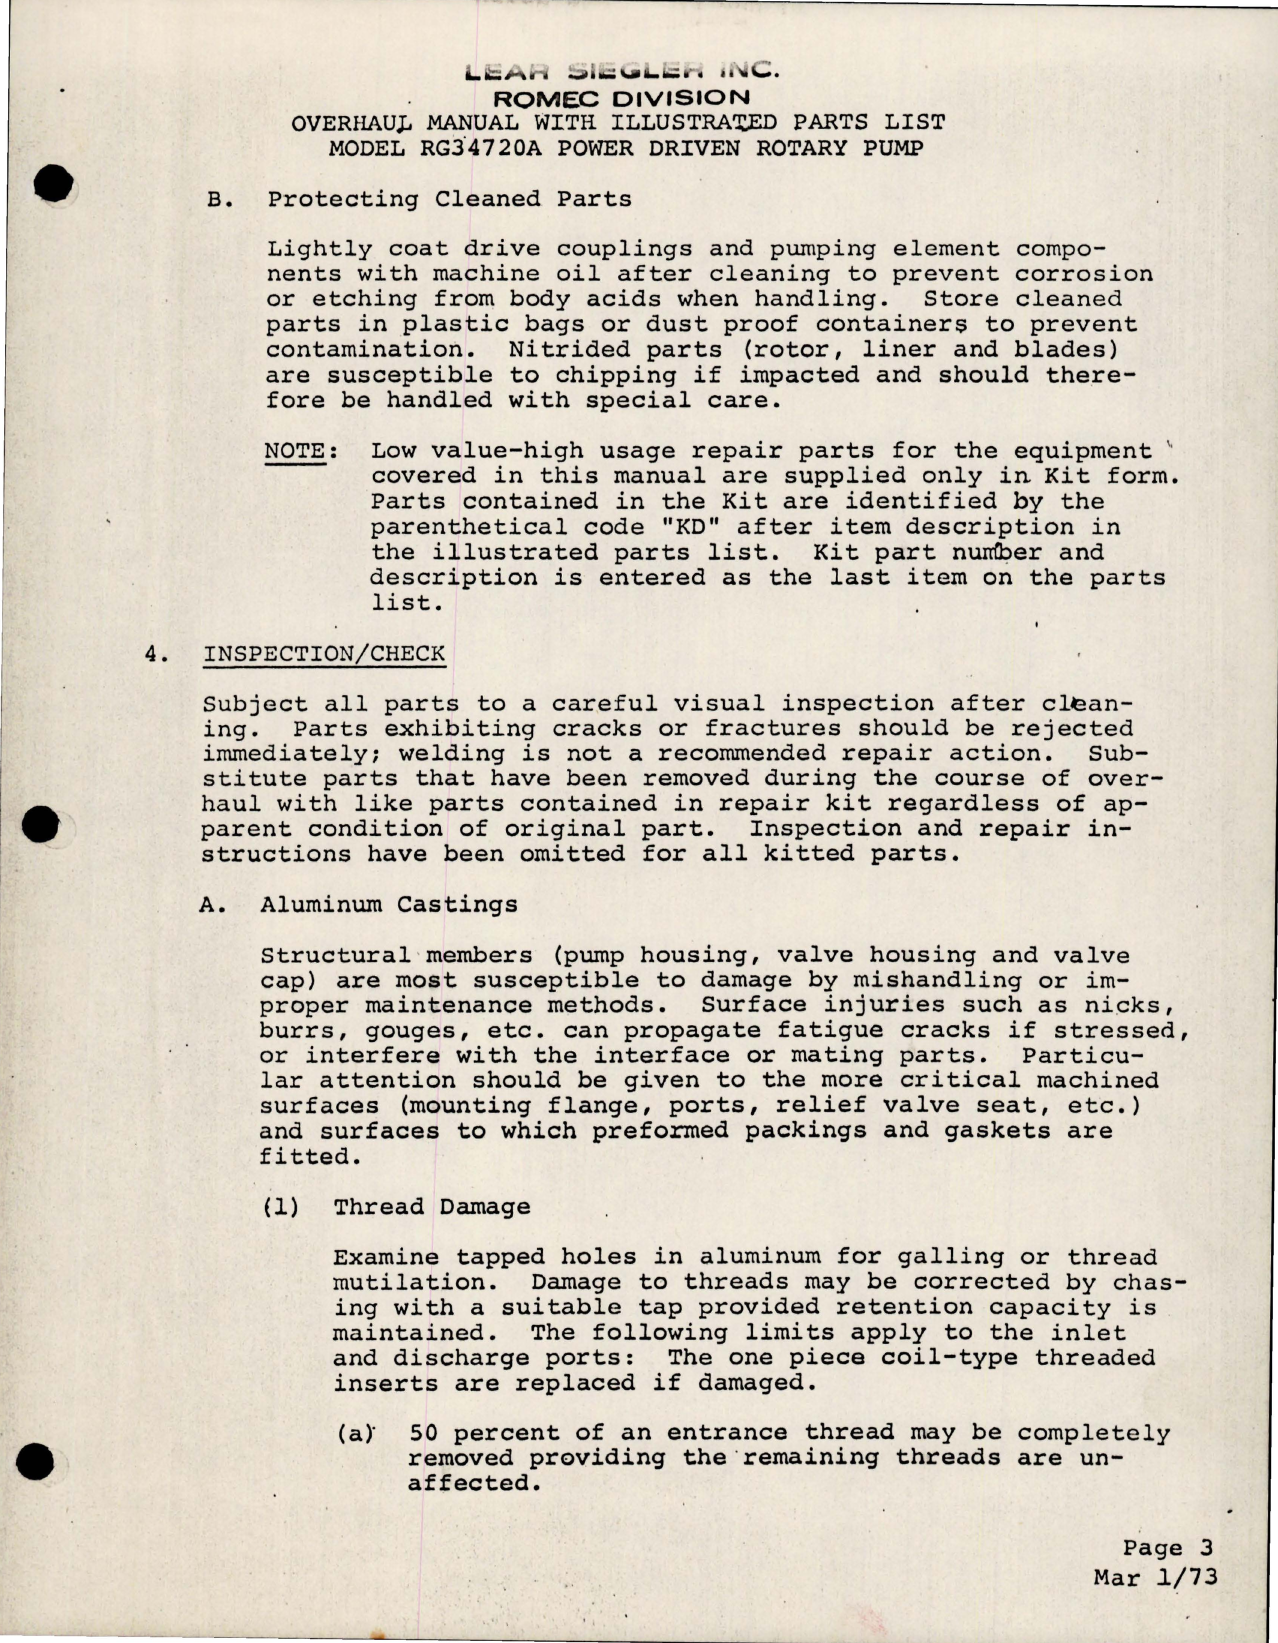 Sample page 5 from AirCorps Library document: Overhaul with Parts List for Power Driven Rotary Pump - Model RG34720A 